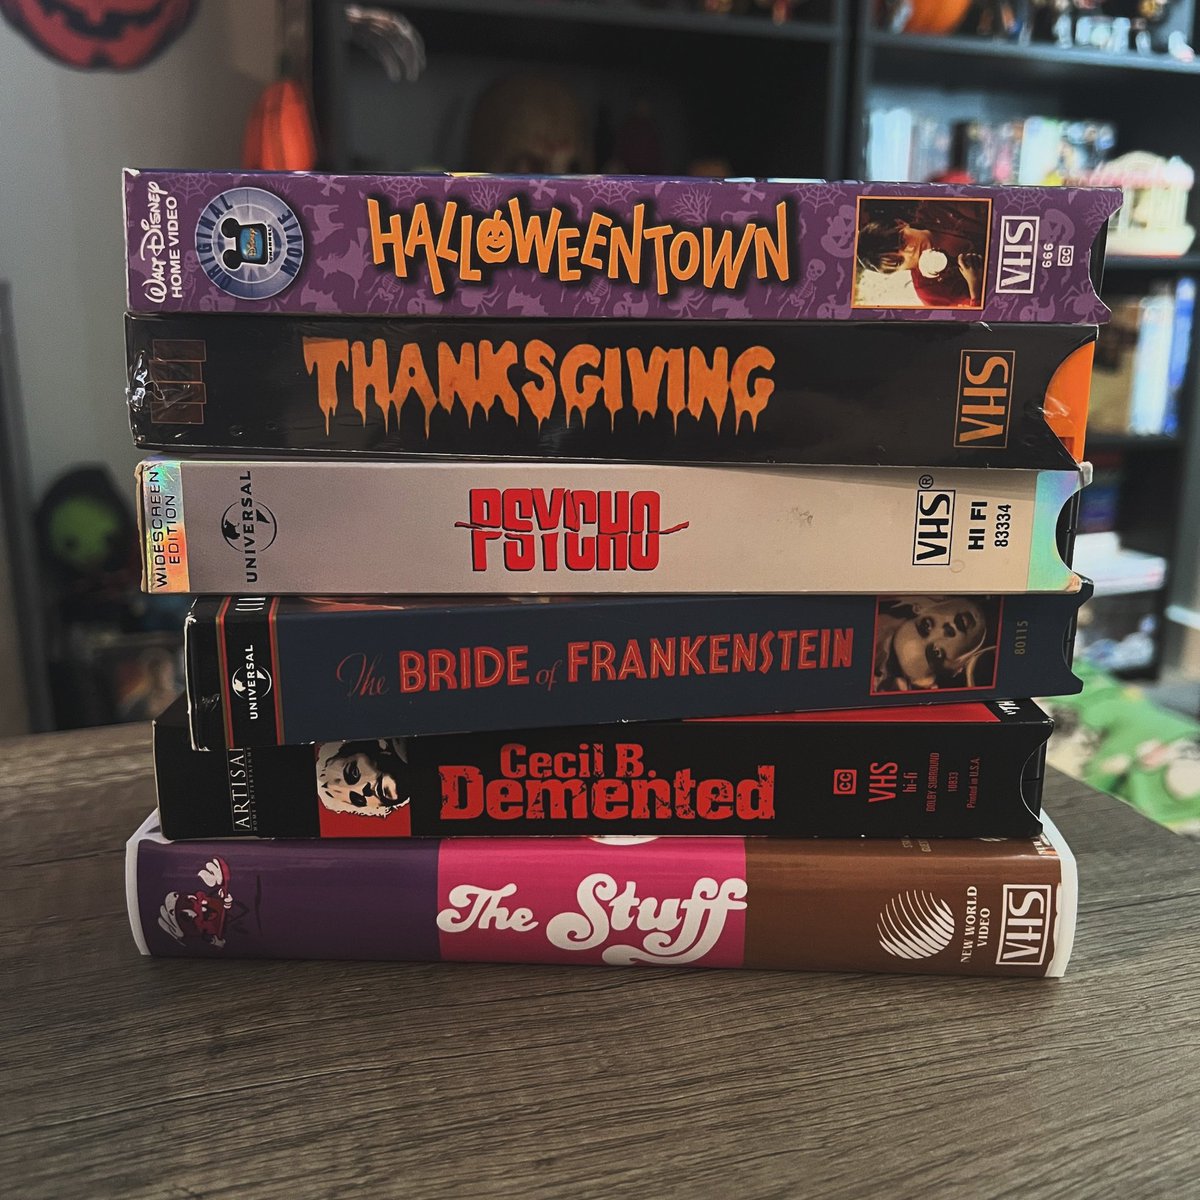 Our recent VHS haul from the last few weeks! 📼
#vhs #vhstapes #vhscollection #vhscollector #horrorvhs #customvhs